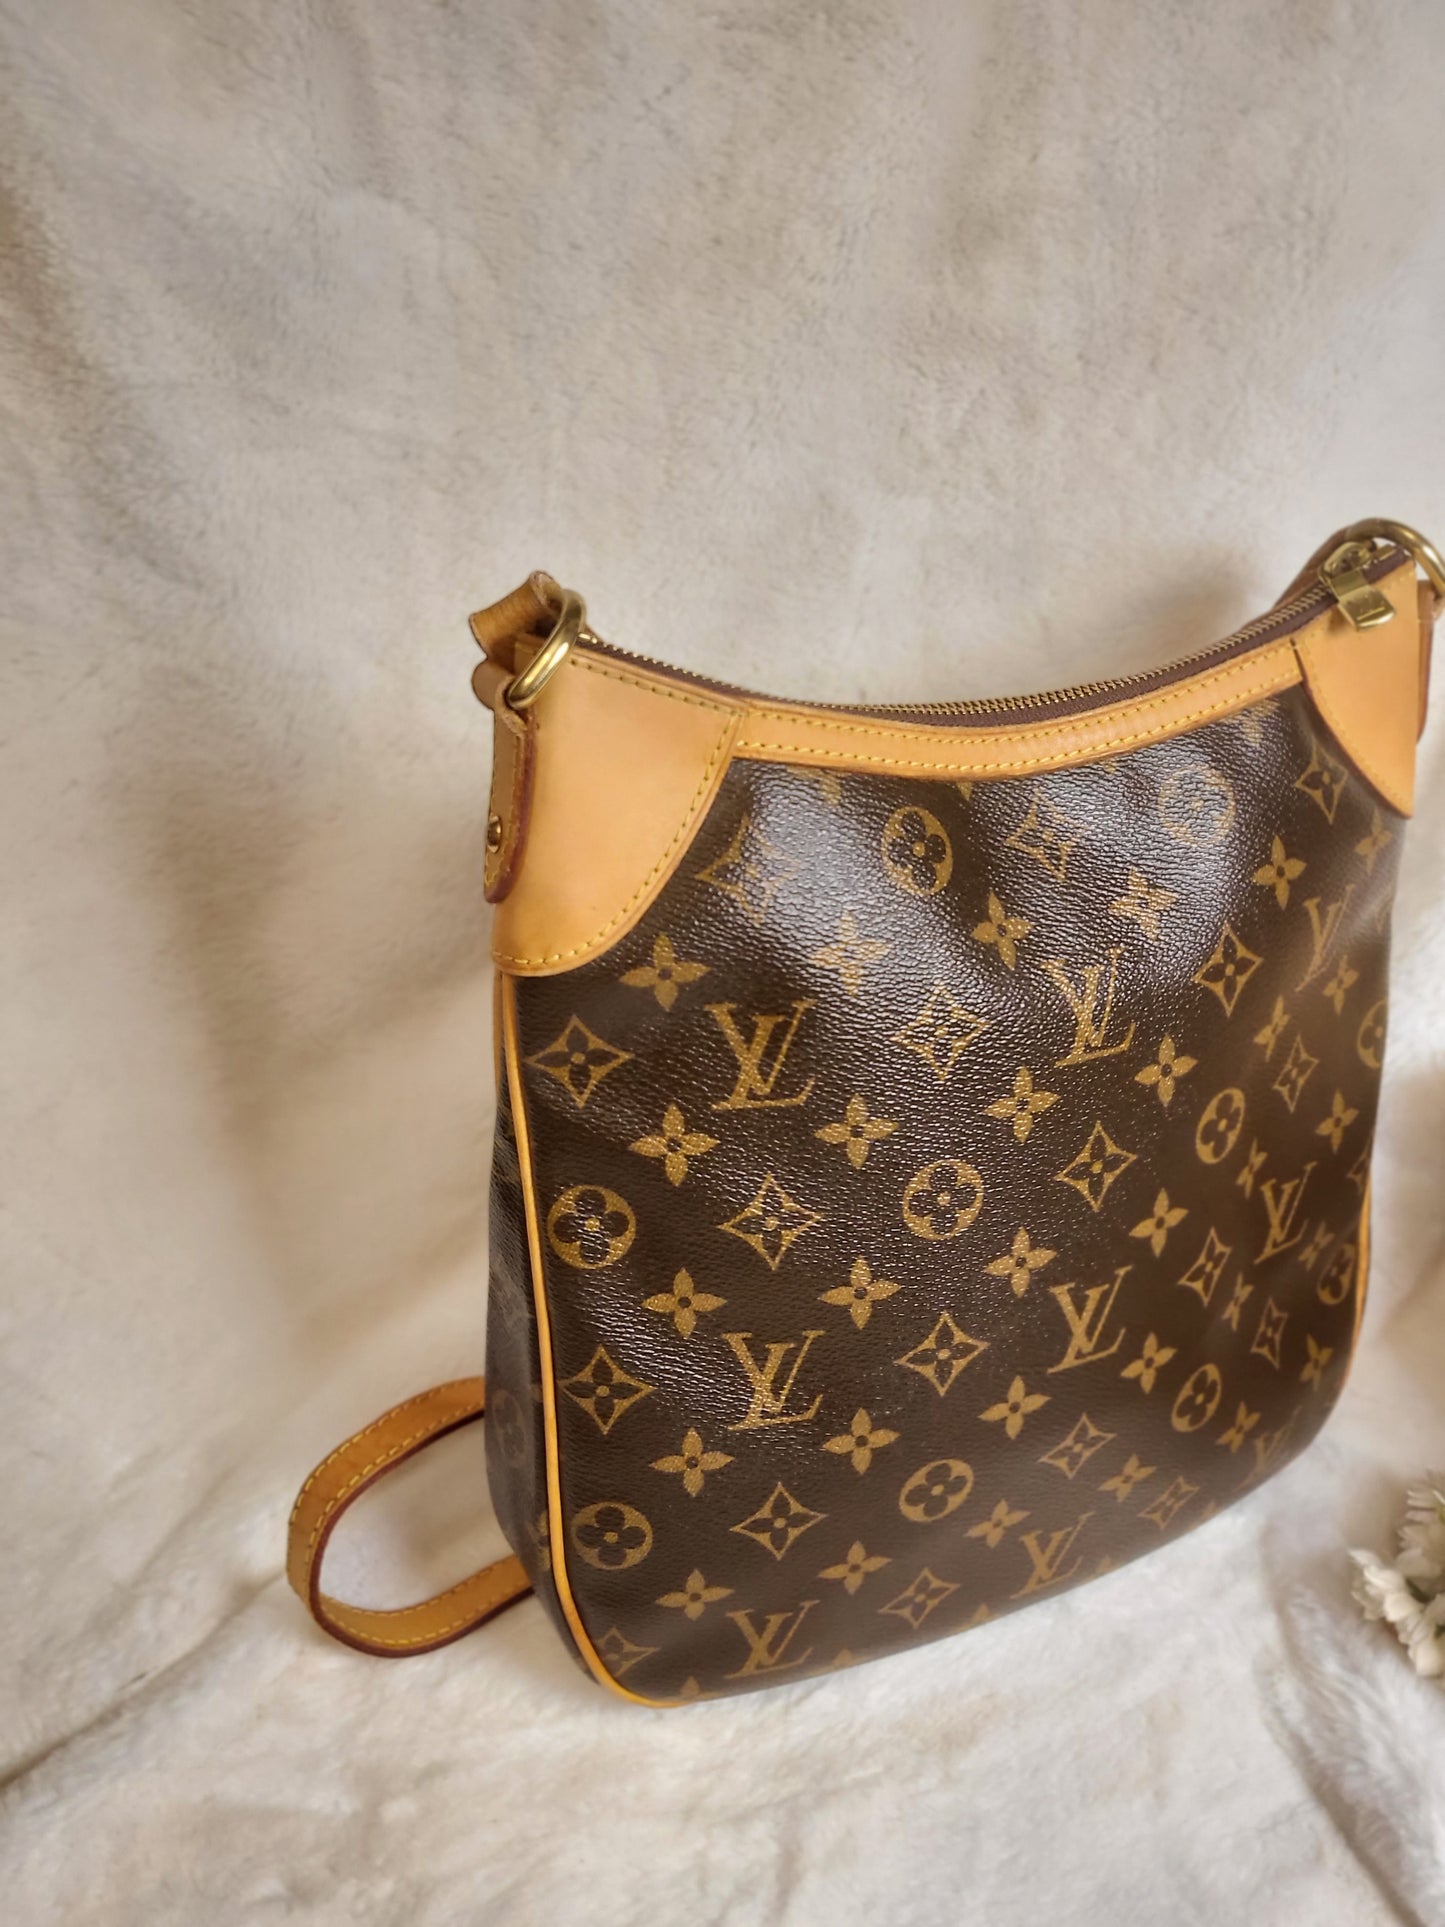 Authentic pre-owned Louis Vuitton odeon pm crossbody shoulder bag